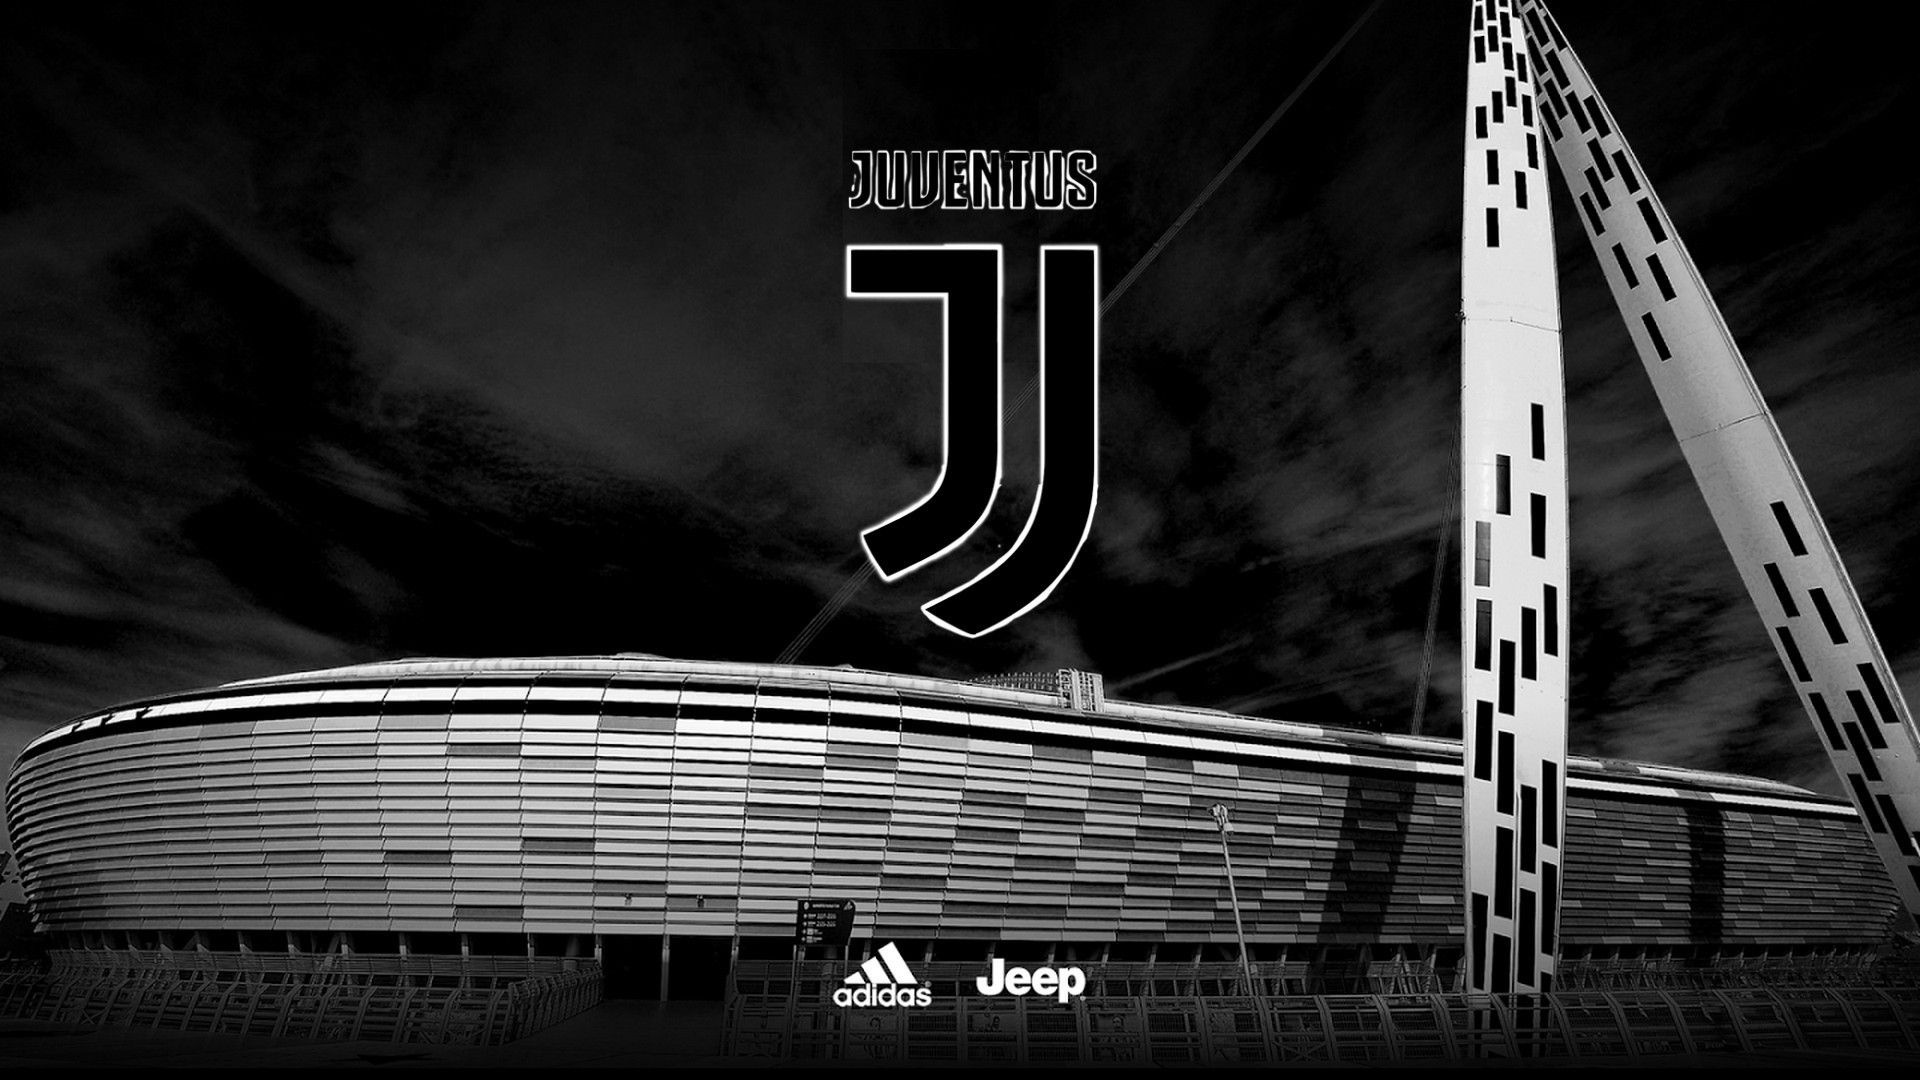 Juventus: Ranked the second-best club in Europe during the 20th century, Monochrome. 1920x1080 Full HD Wallpaper.